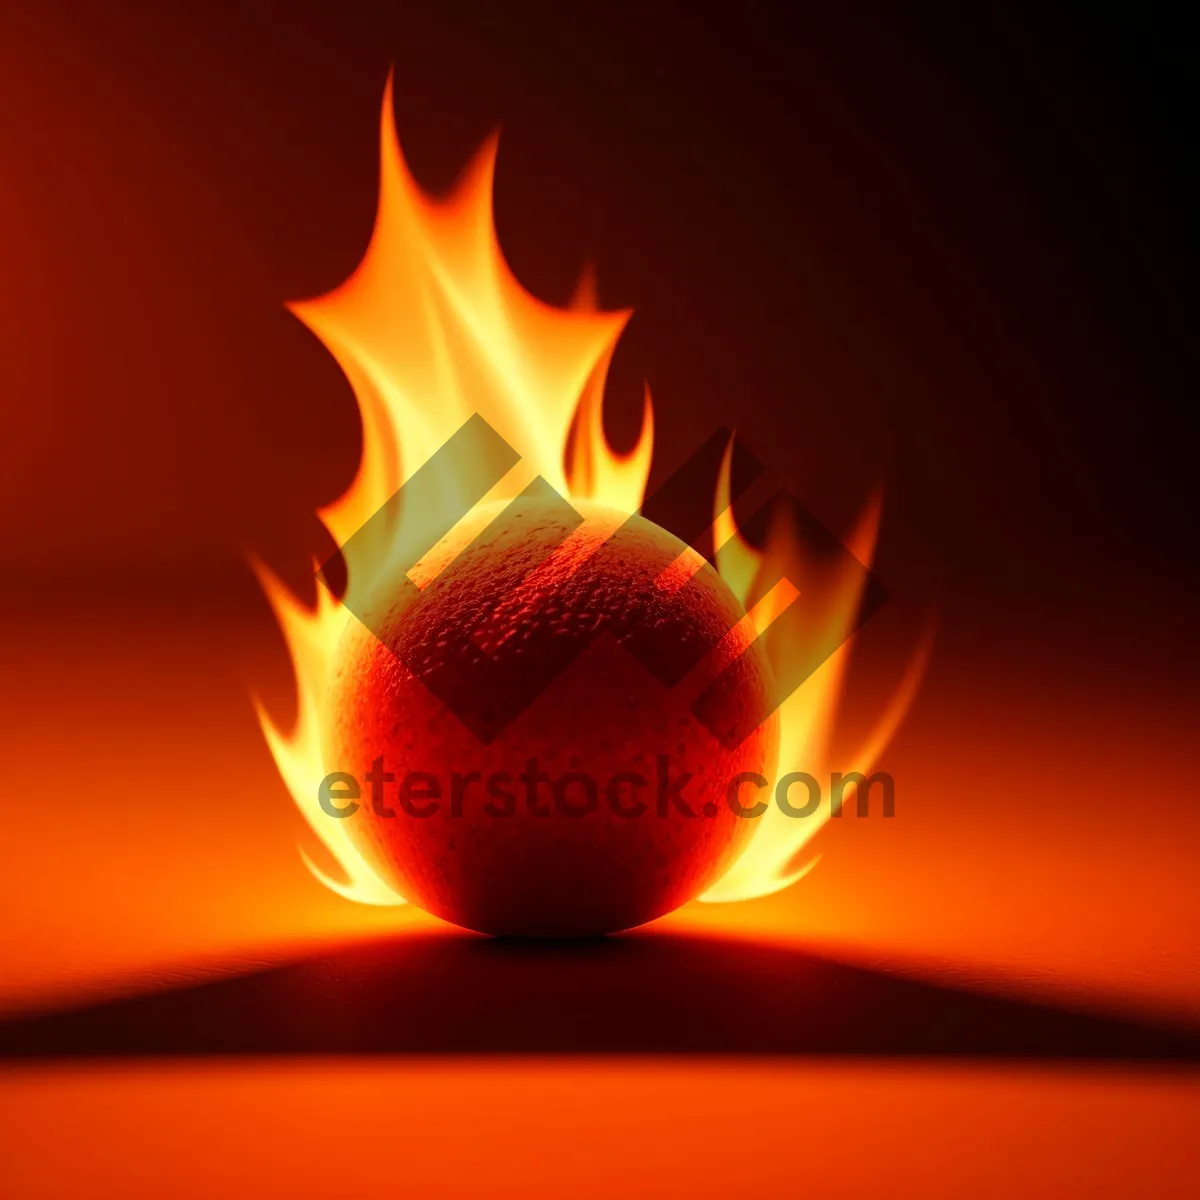 Picture of Fiery Glow: Symbolic Energy Art with Burning Flame